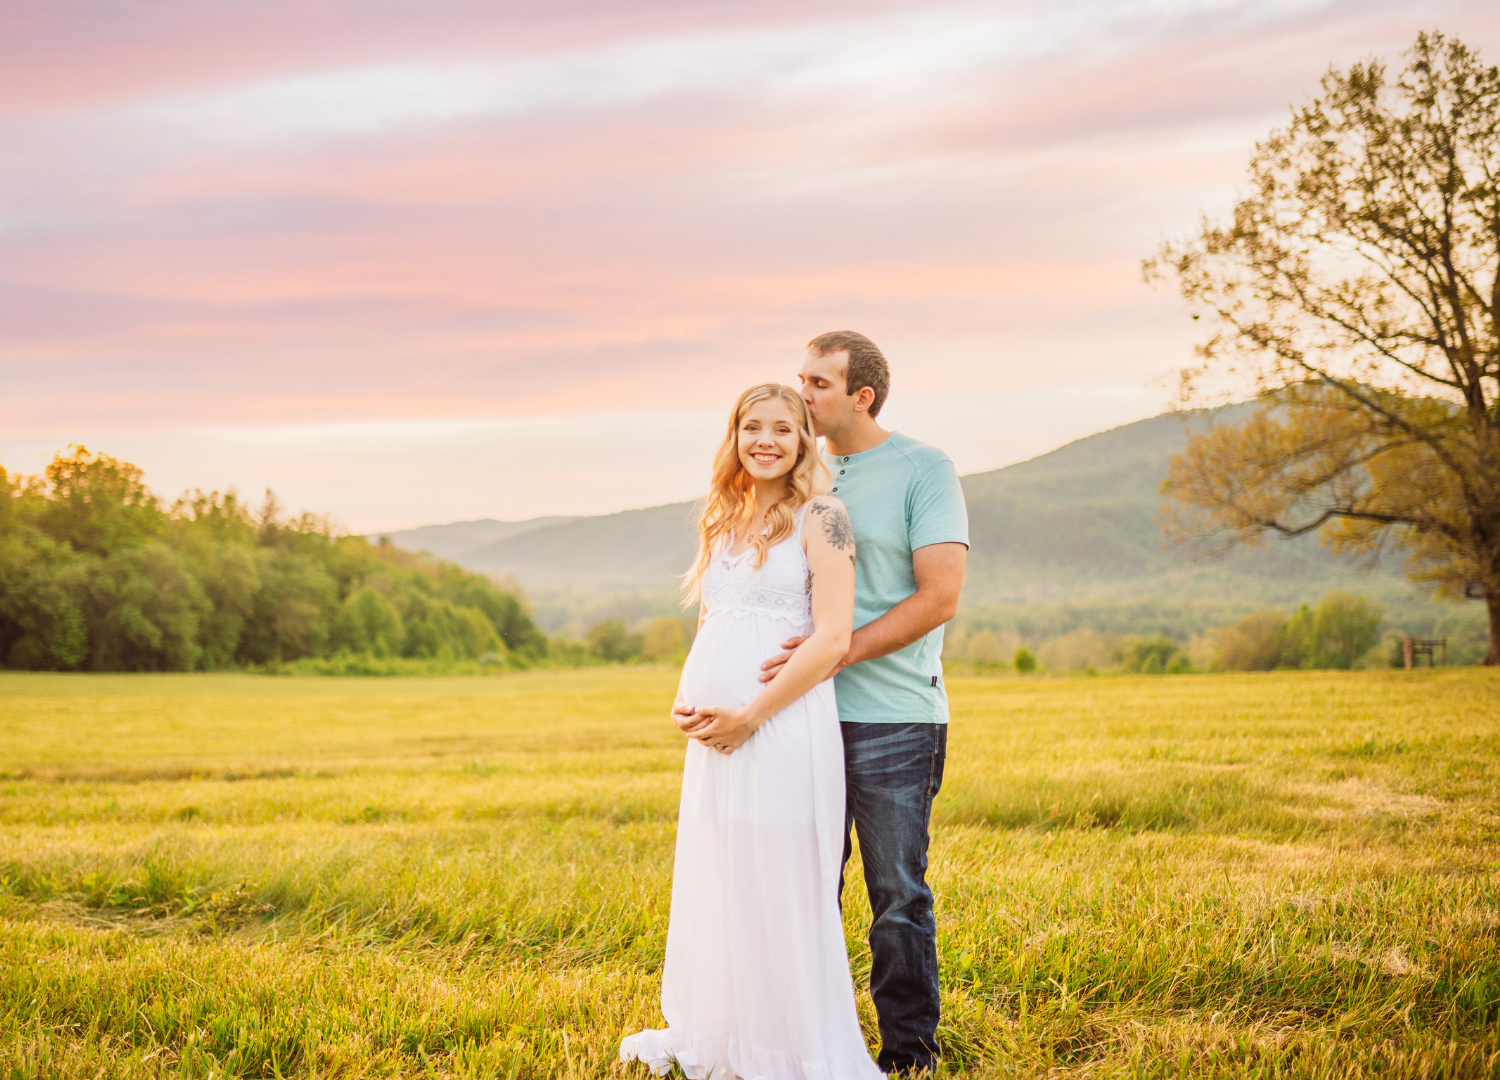 Maternity Photos in the Smoky Mountains